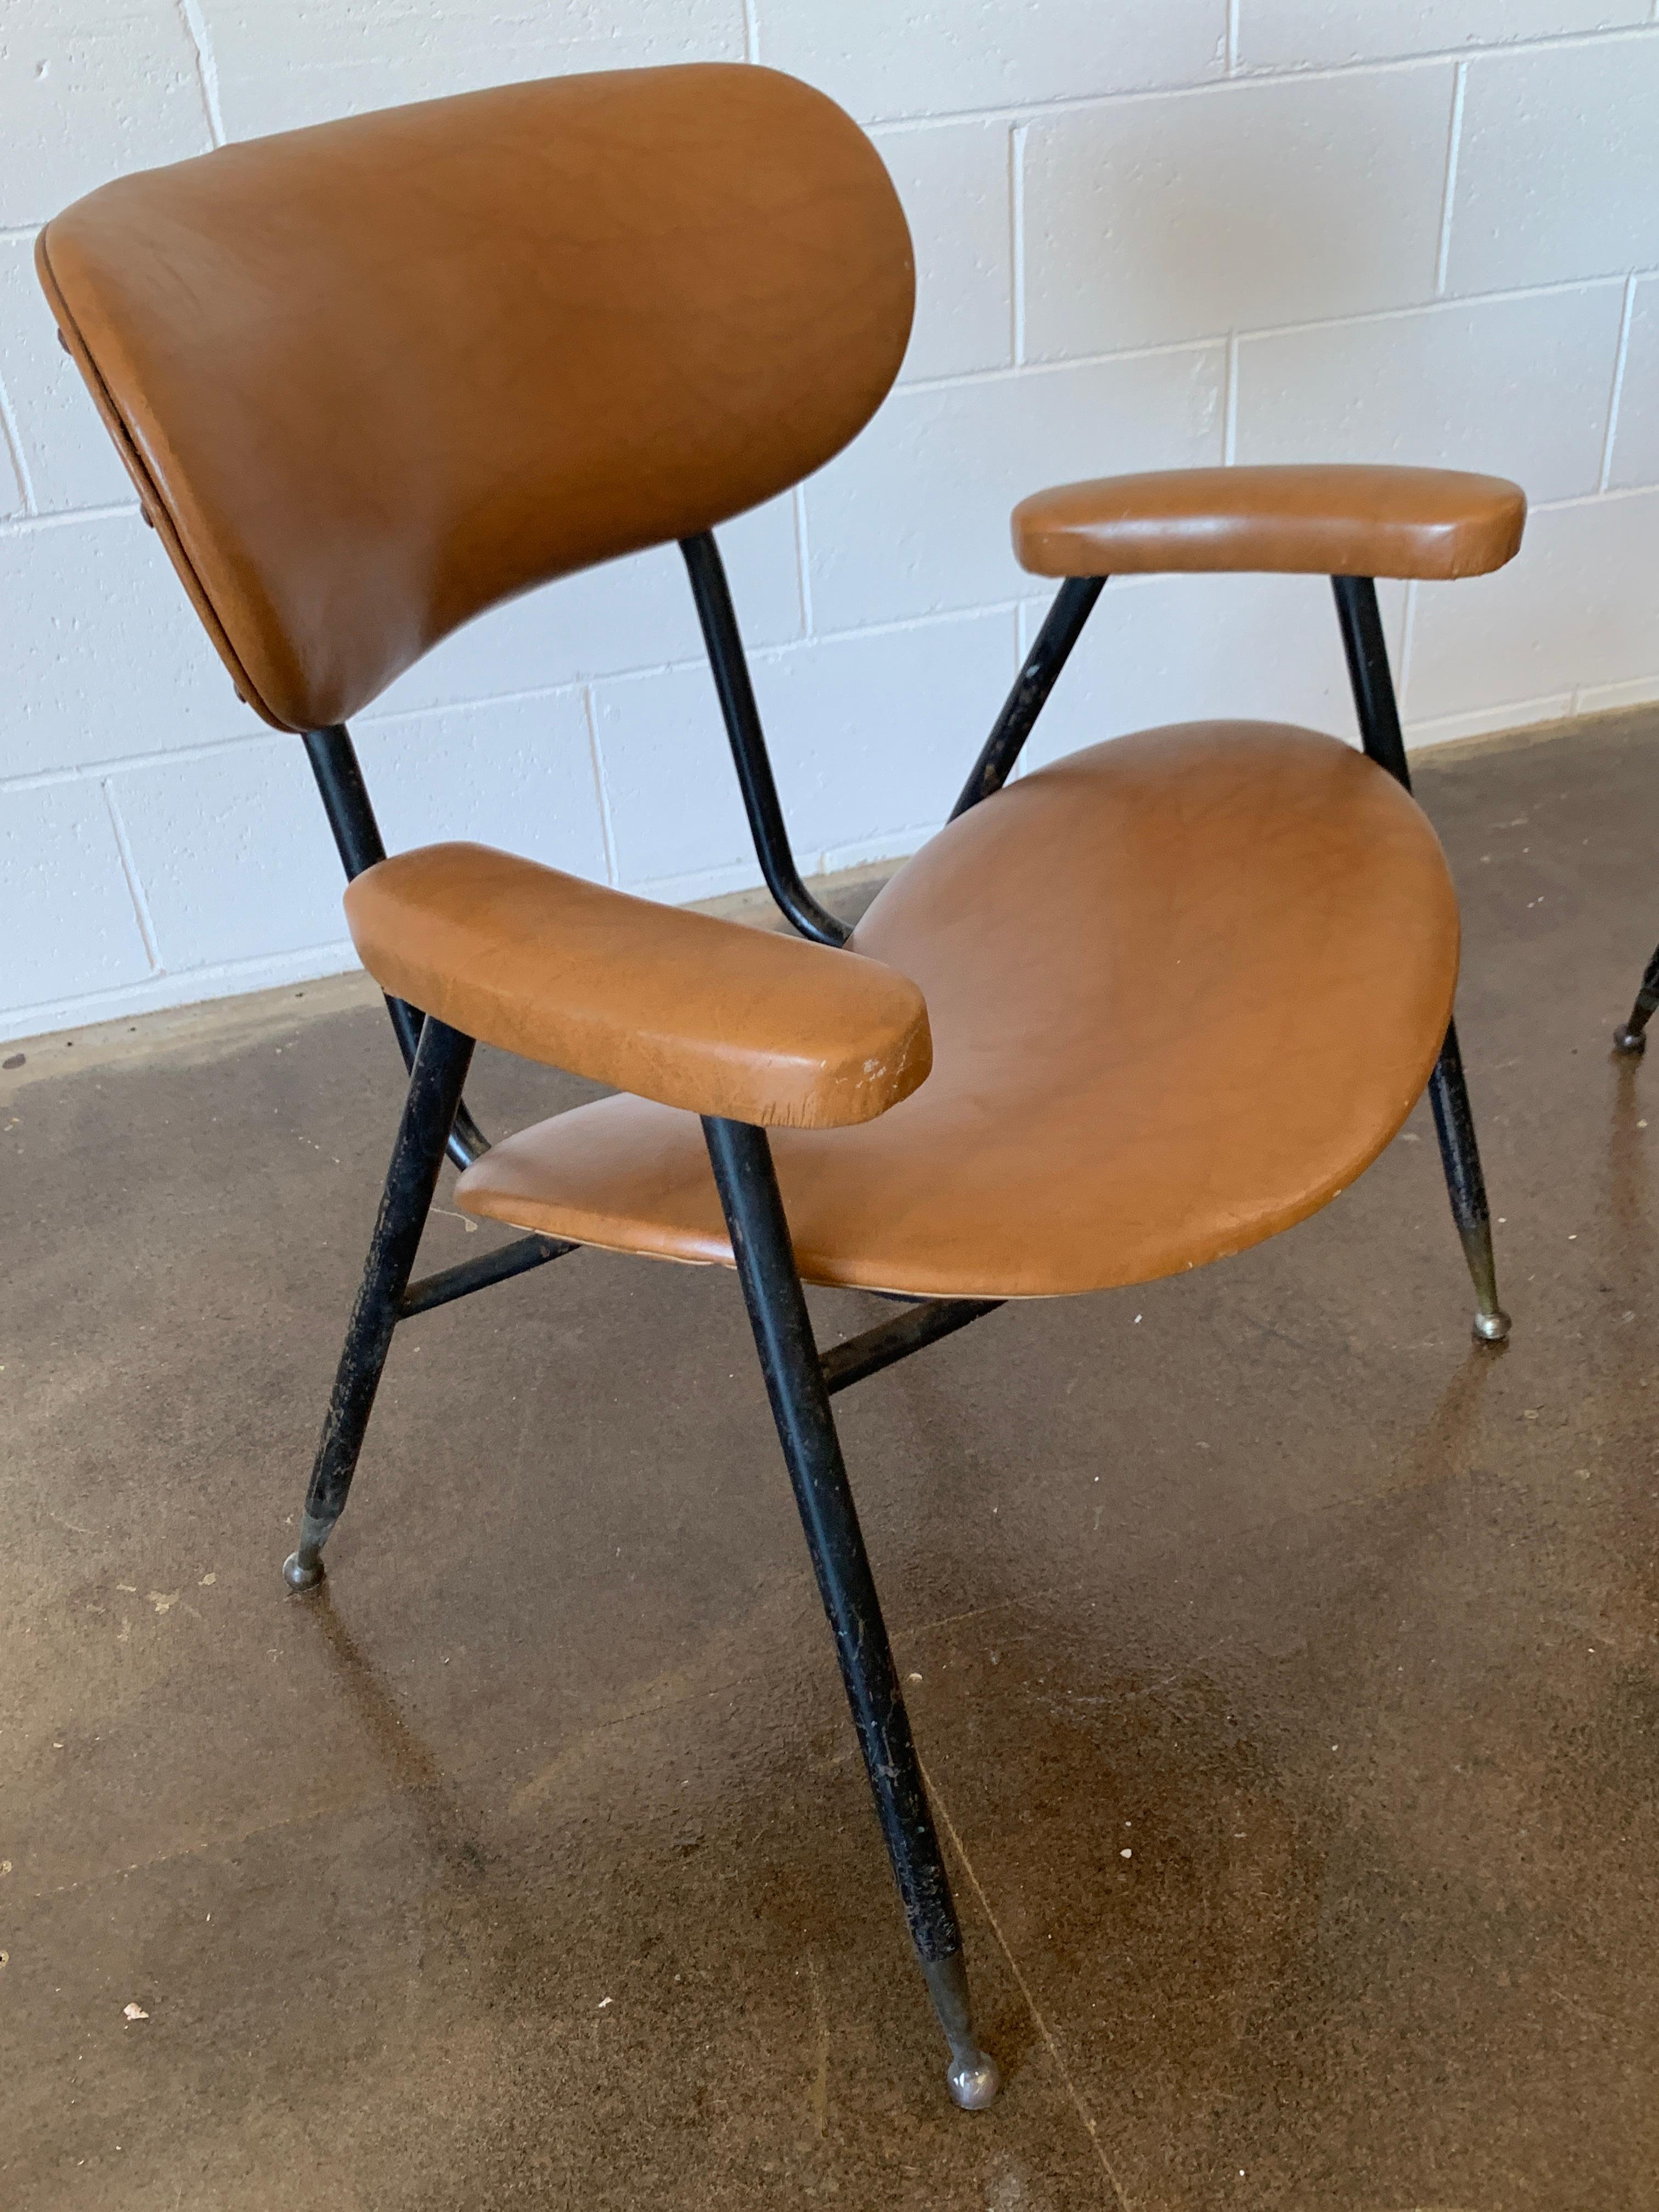 Two Italian Faux Leather Chairs by Gastone Rinaldi for RIMA 1960s  For Sale 6